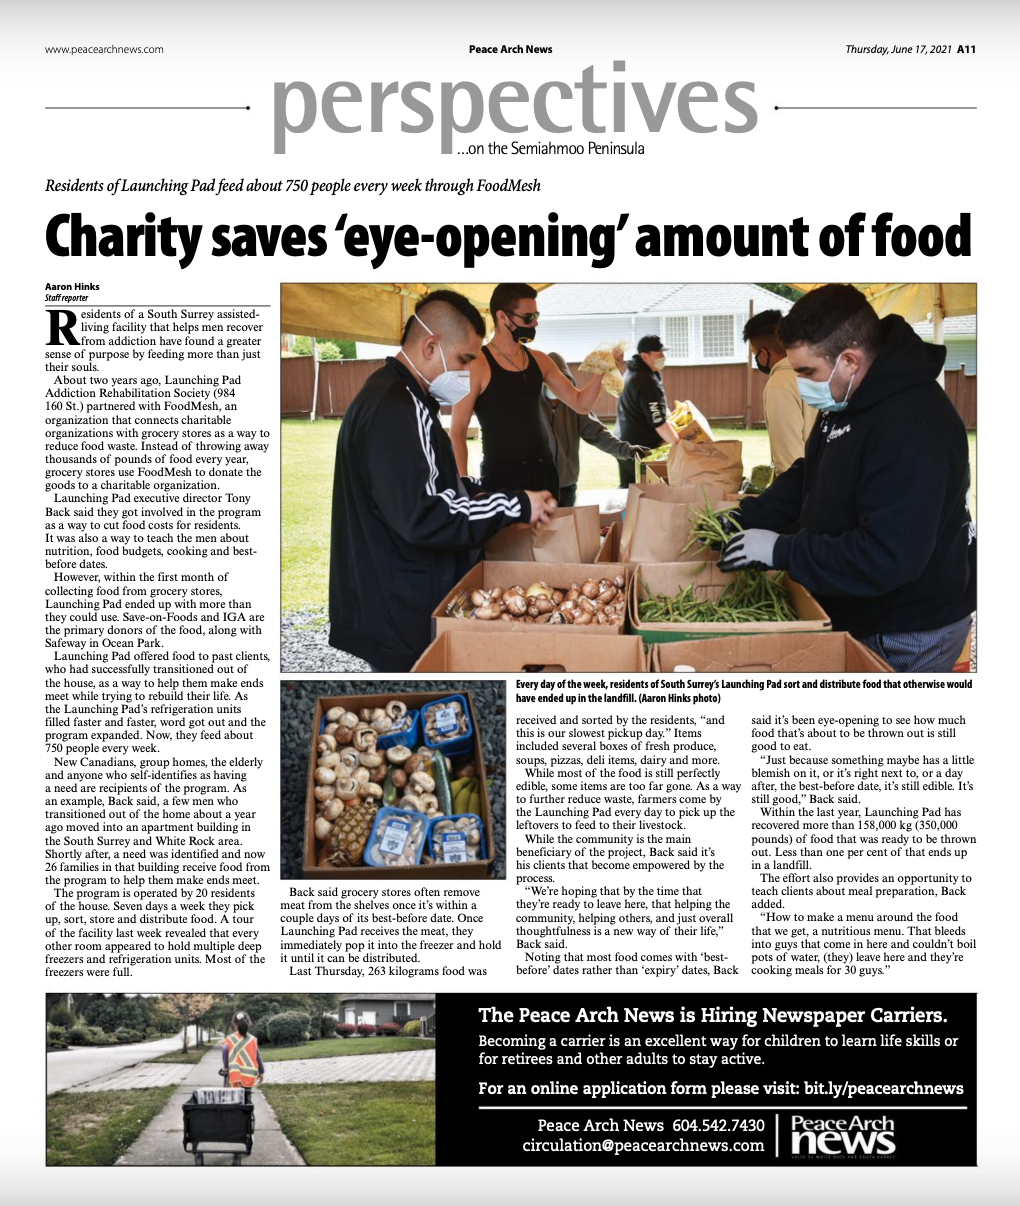 "Charity saves 'eye-opening' amount of food" - Peach Arch News